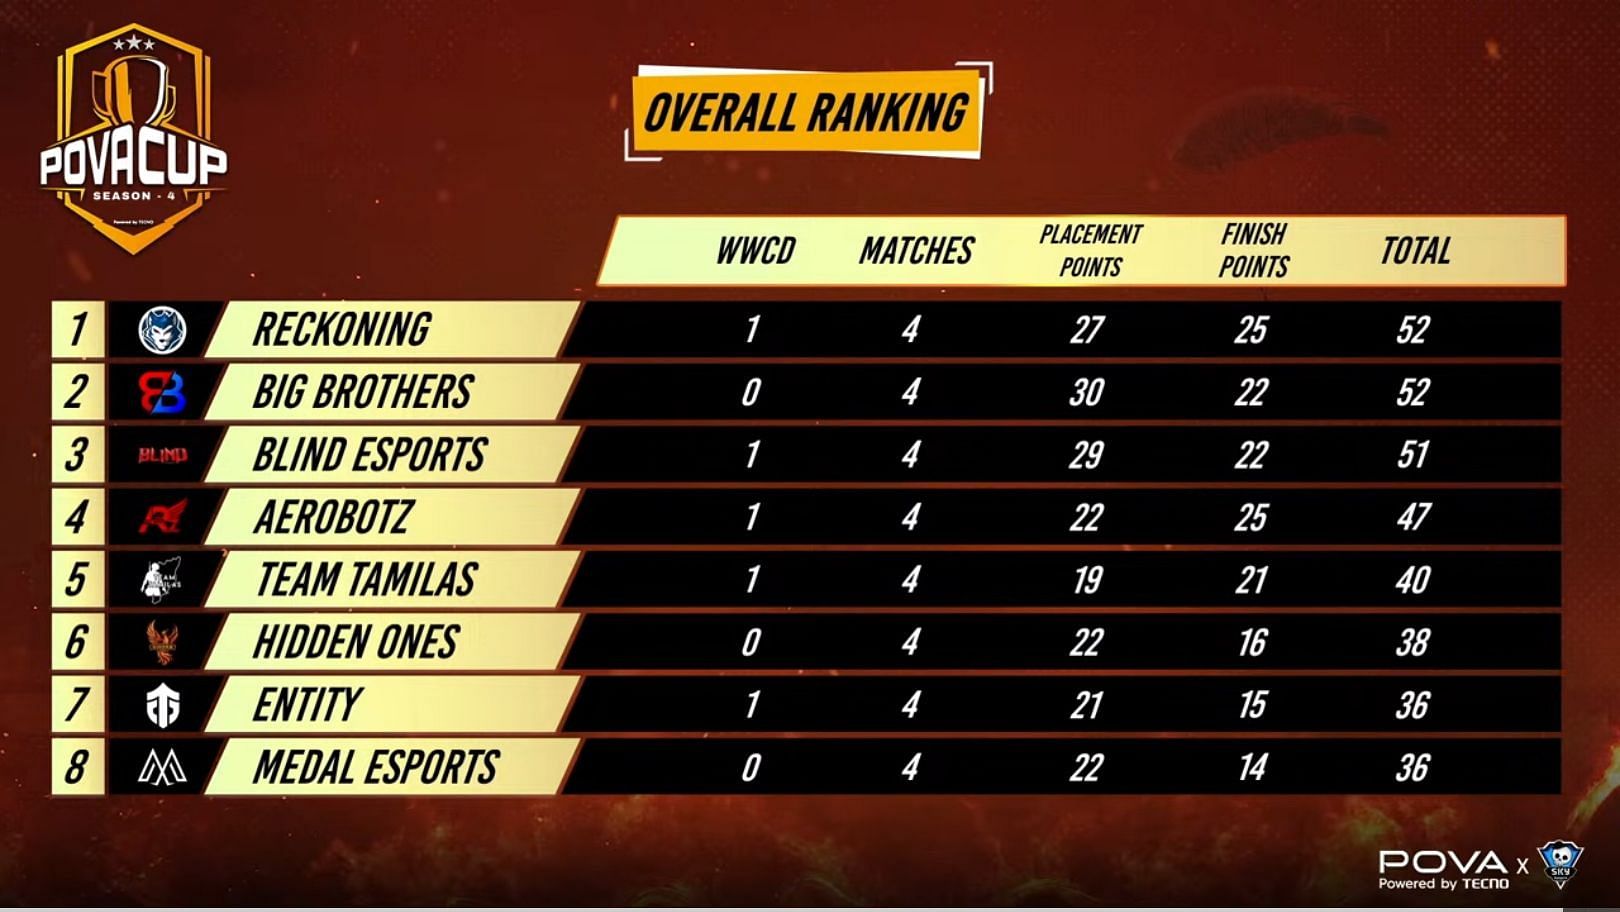 Reckoning and Big Brother scored 52 points each on Day 1 (Image via Skyesports)